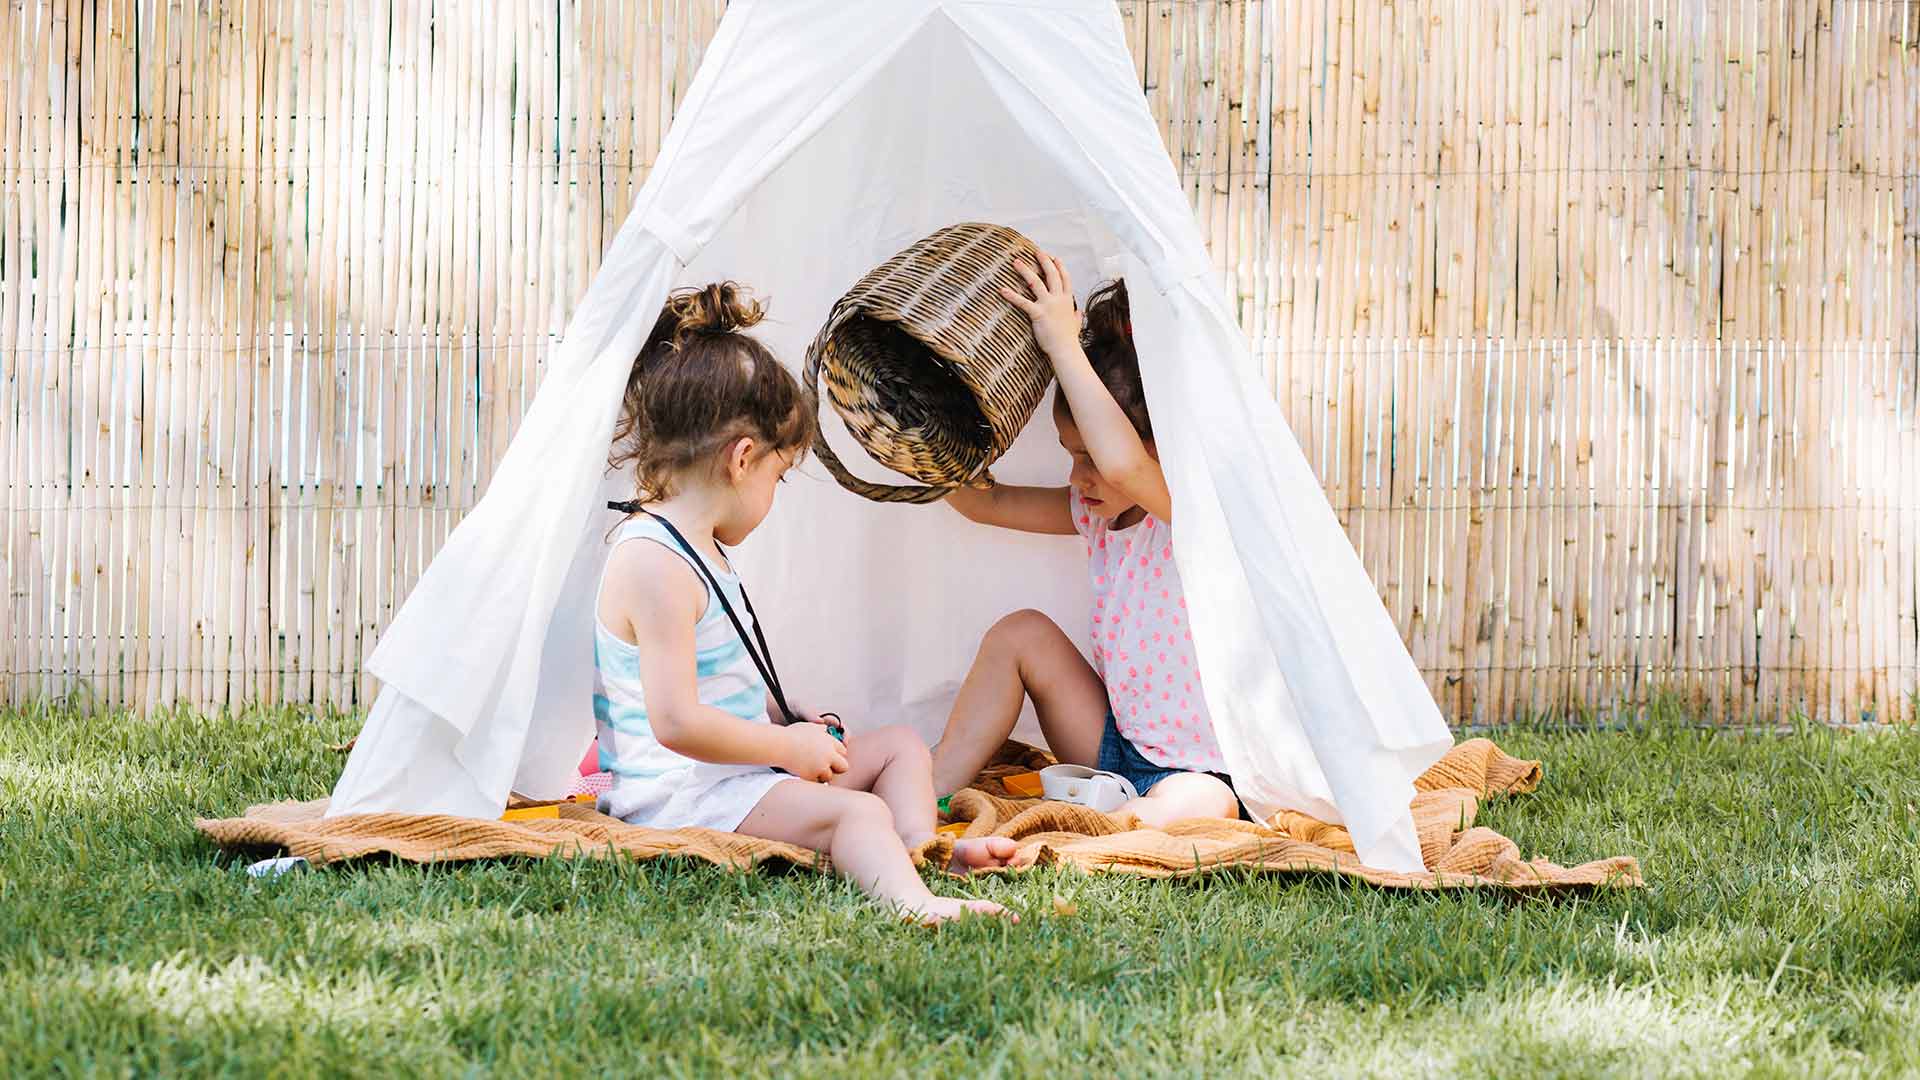 Reasons To Make a Homemade Tent for Your Kids